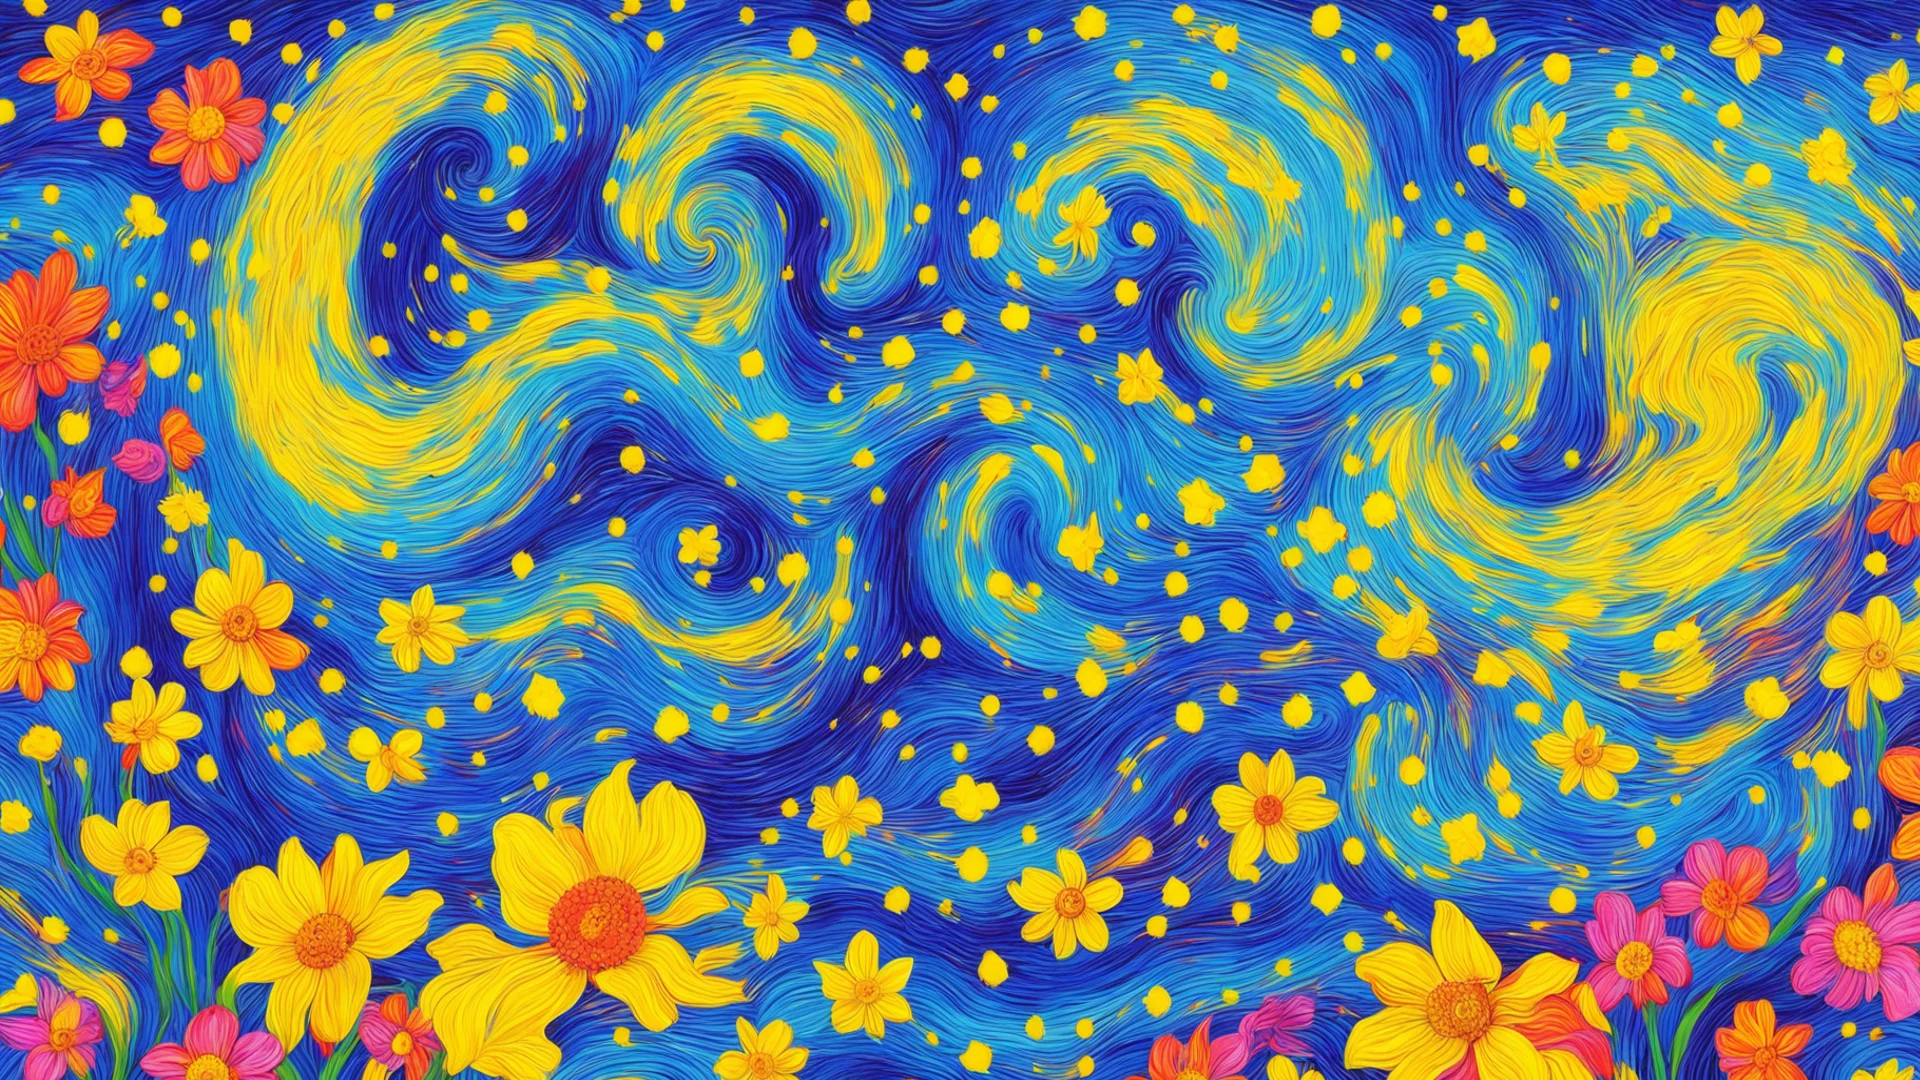 amazing starry night van gogh beautiful colors swirl flowers awesome portrait 2 wide